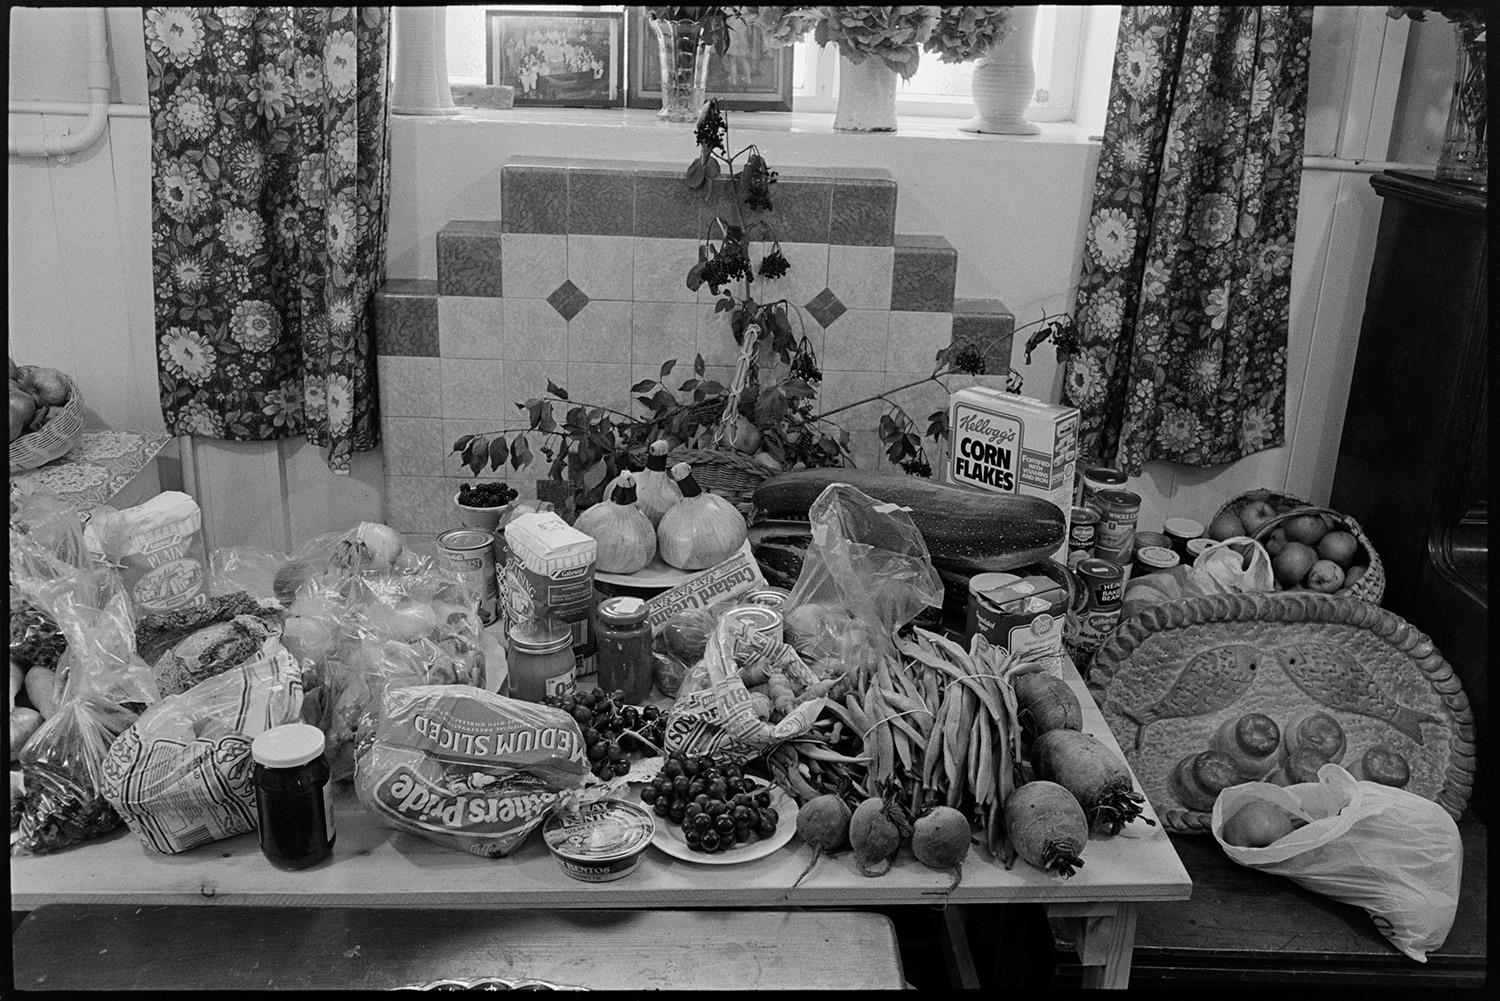 Congregational chapel Harvest supper, singing after meal, sale produce on display.
[A display of produce for sale at the Harvest Festival supper in Chulmleigh Congregational chapel. There is canned food, jars of produce, cereals, fruit, vegetables and a salt dough loaf of bread decorated with fives loaves and two fish. A curtained window with vases of flowers and a tiled fireplace is in the background.]